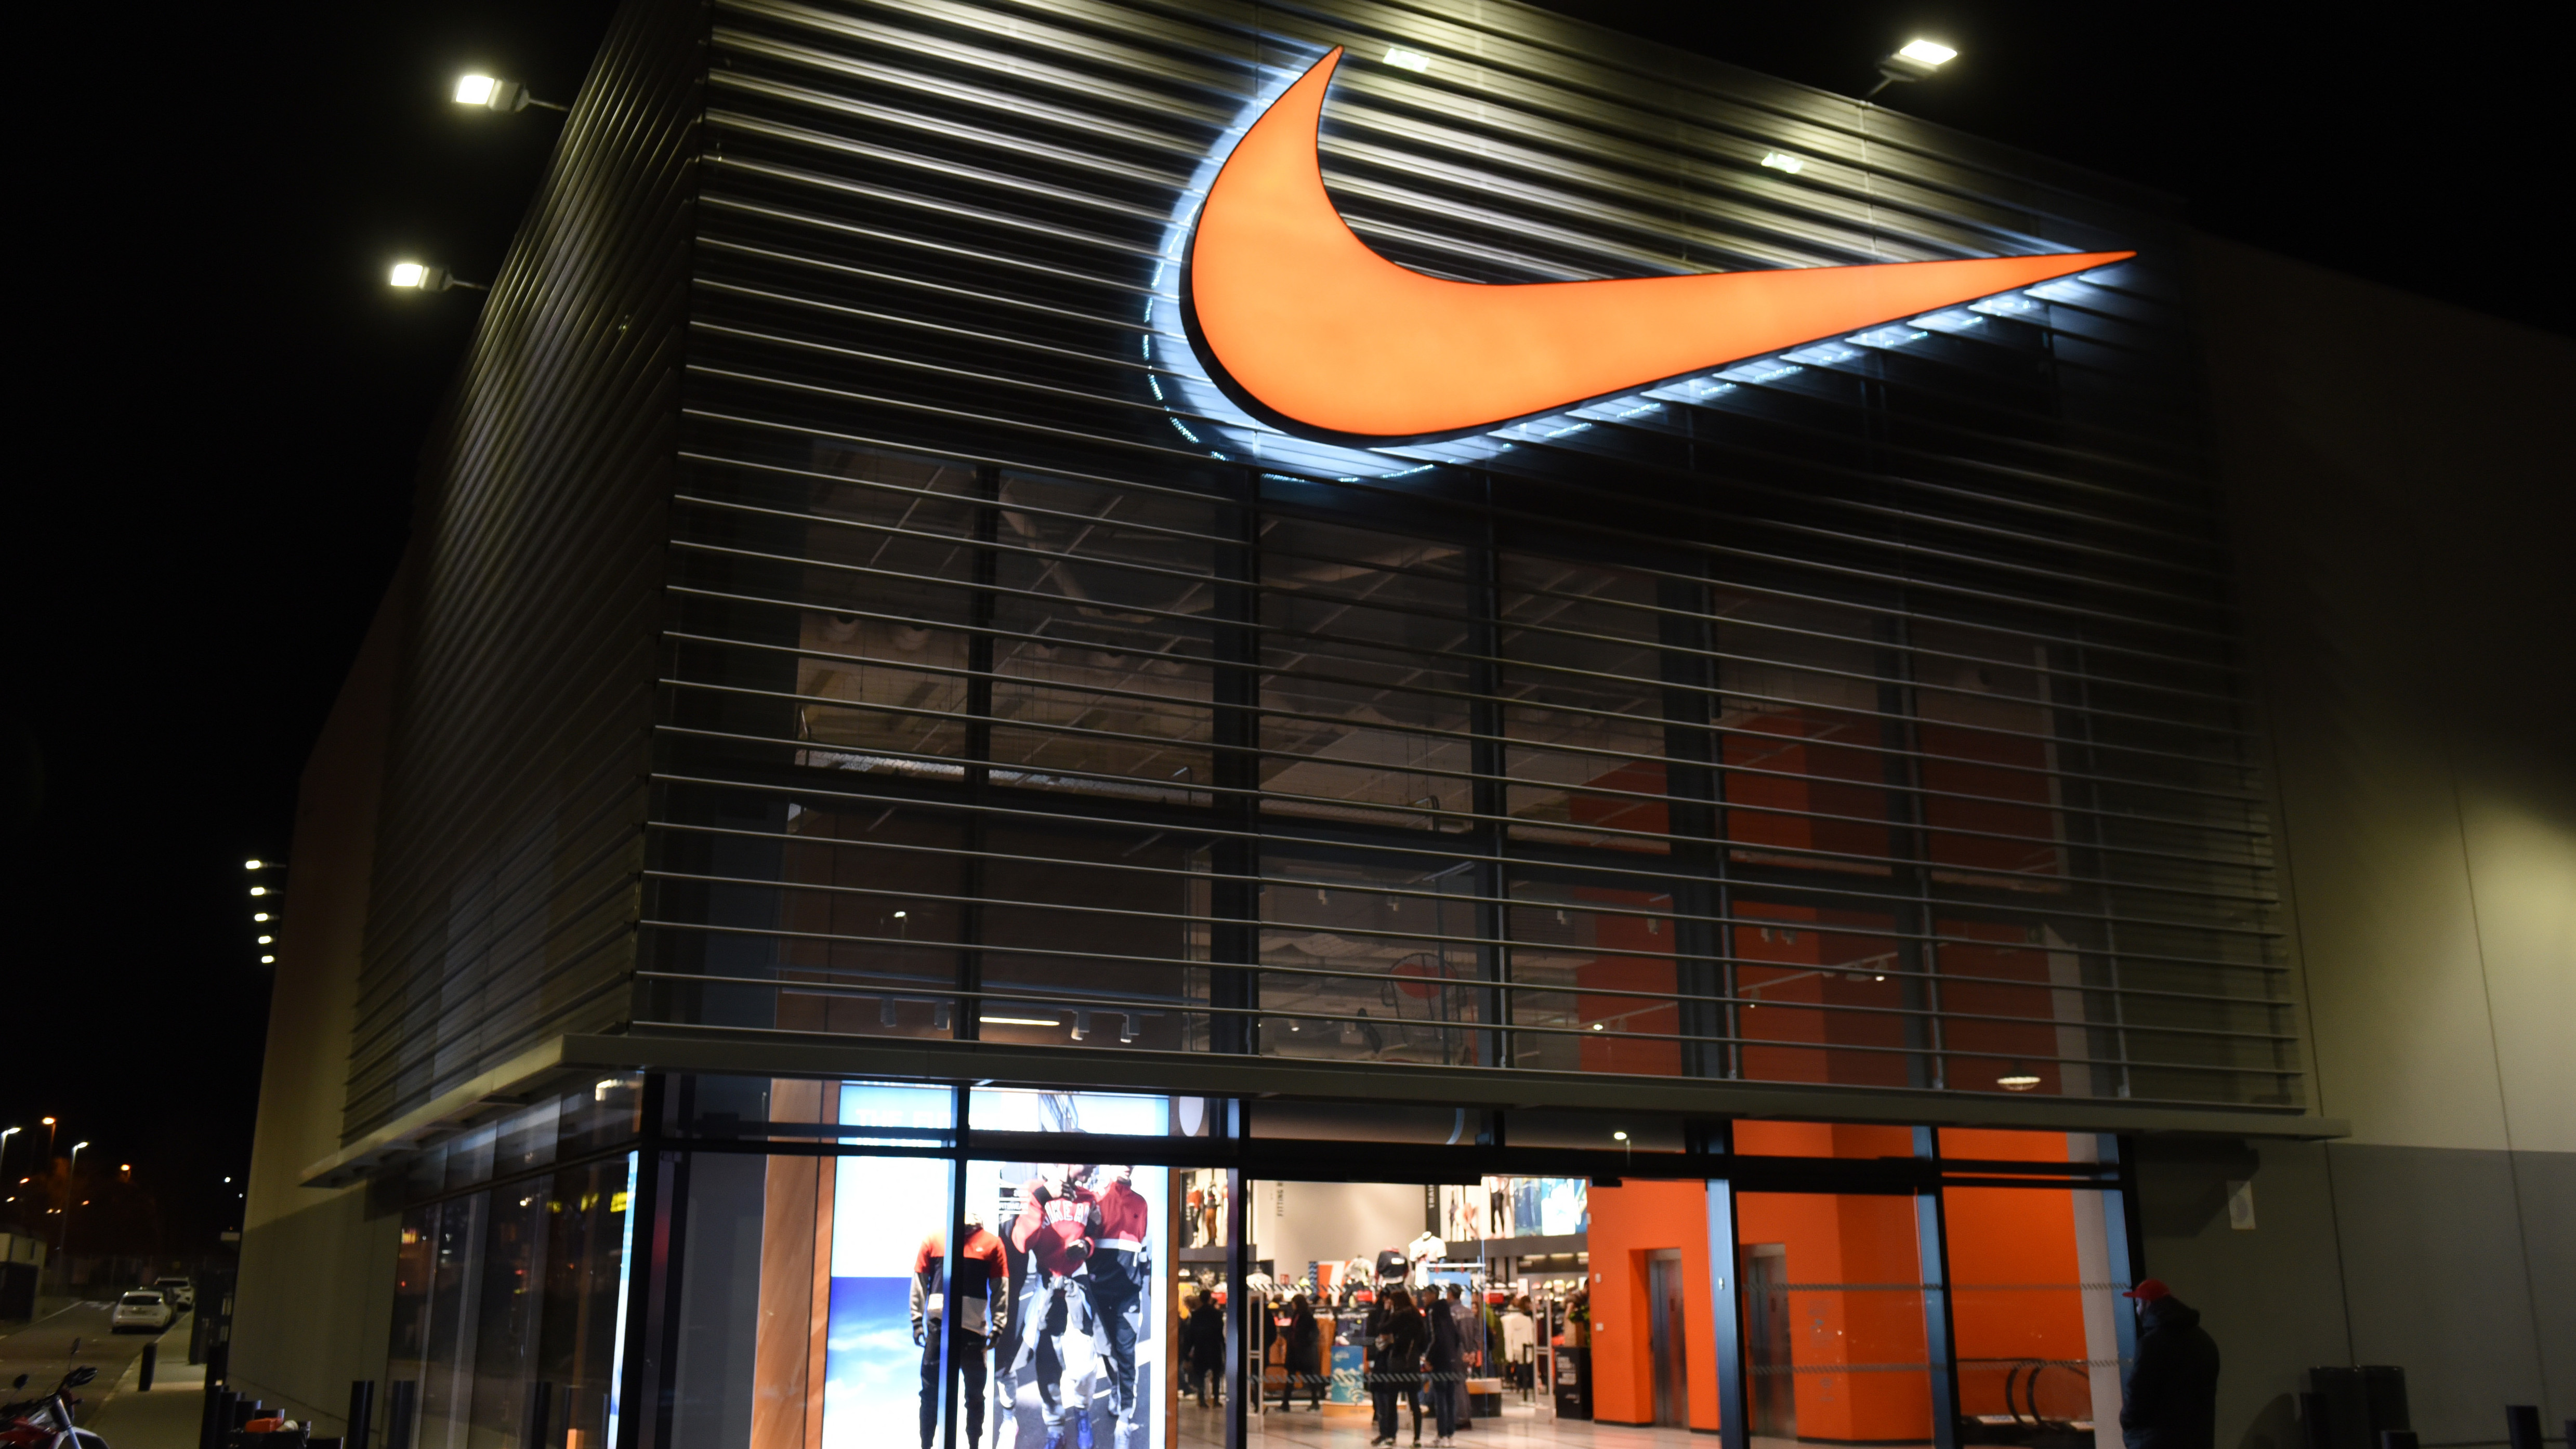 nike store employees fired